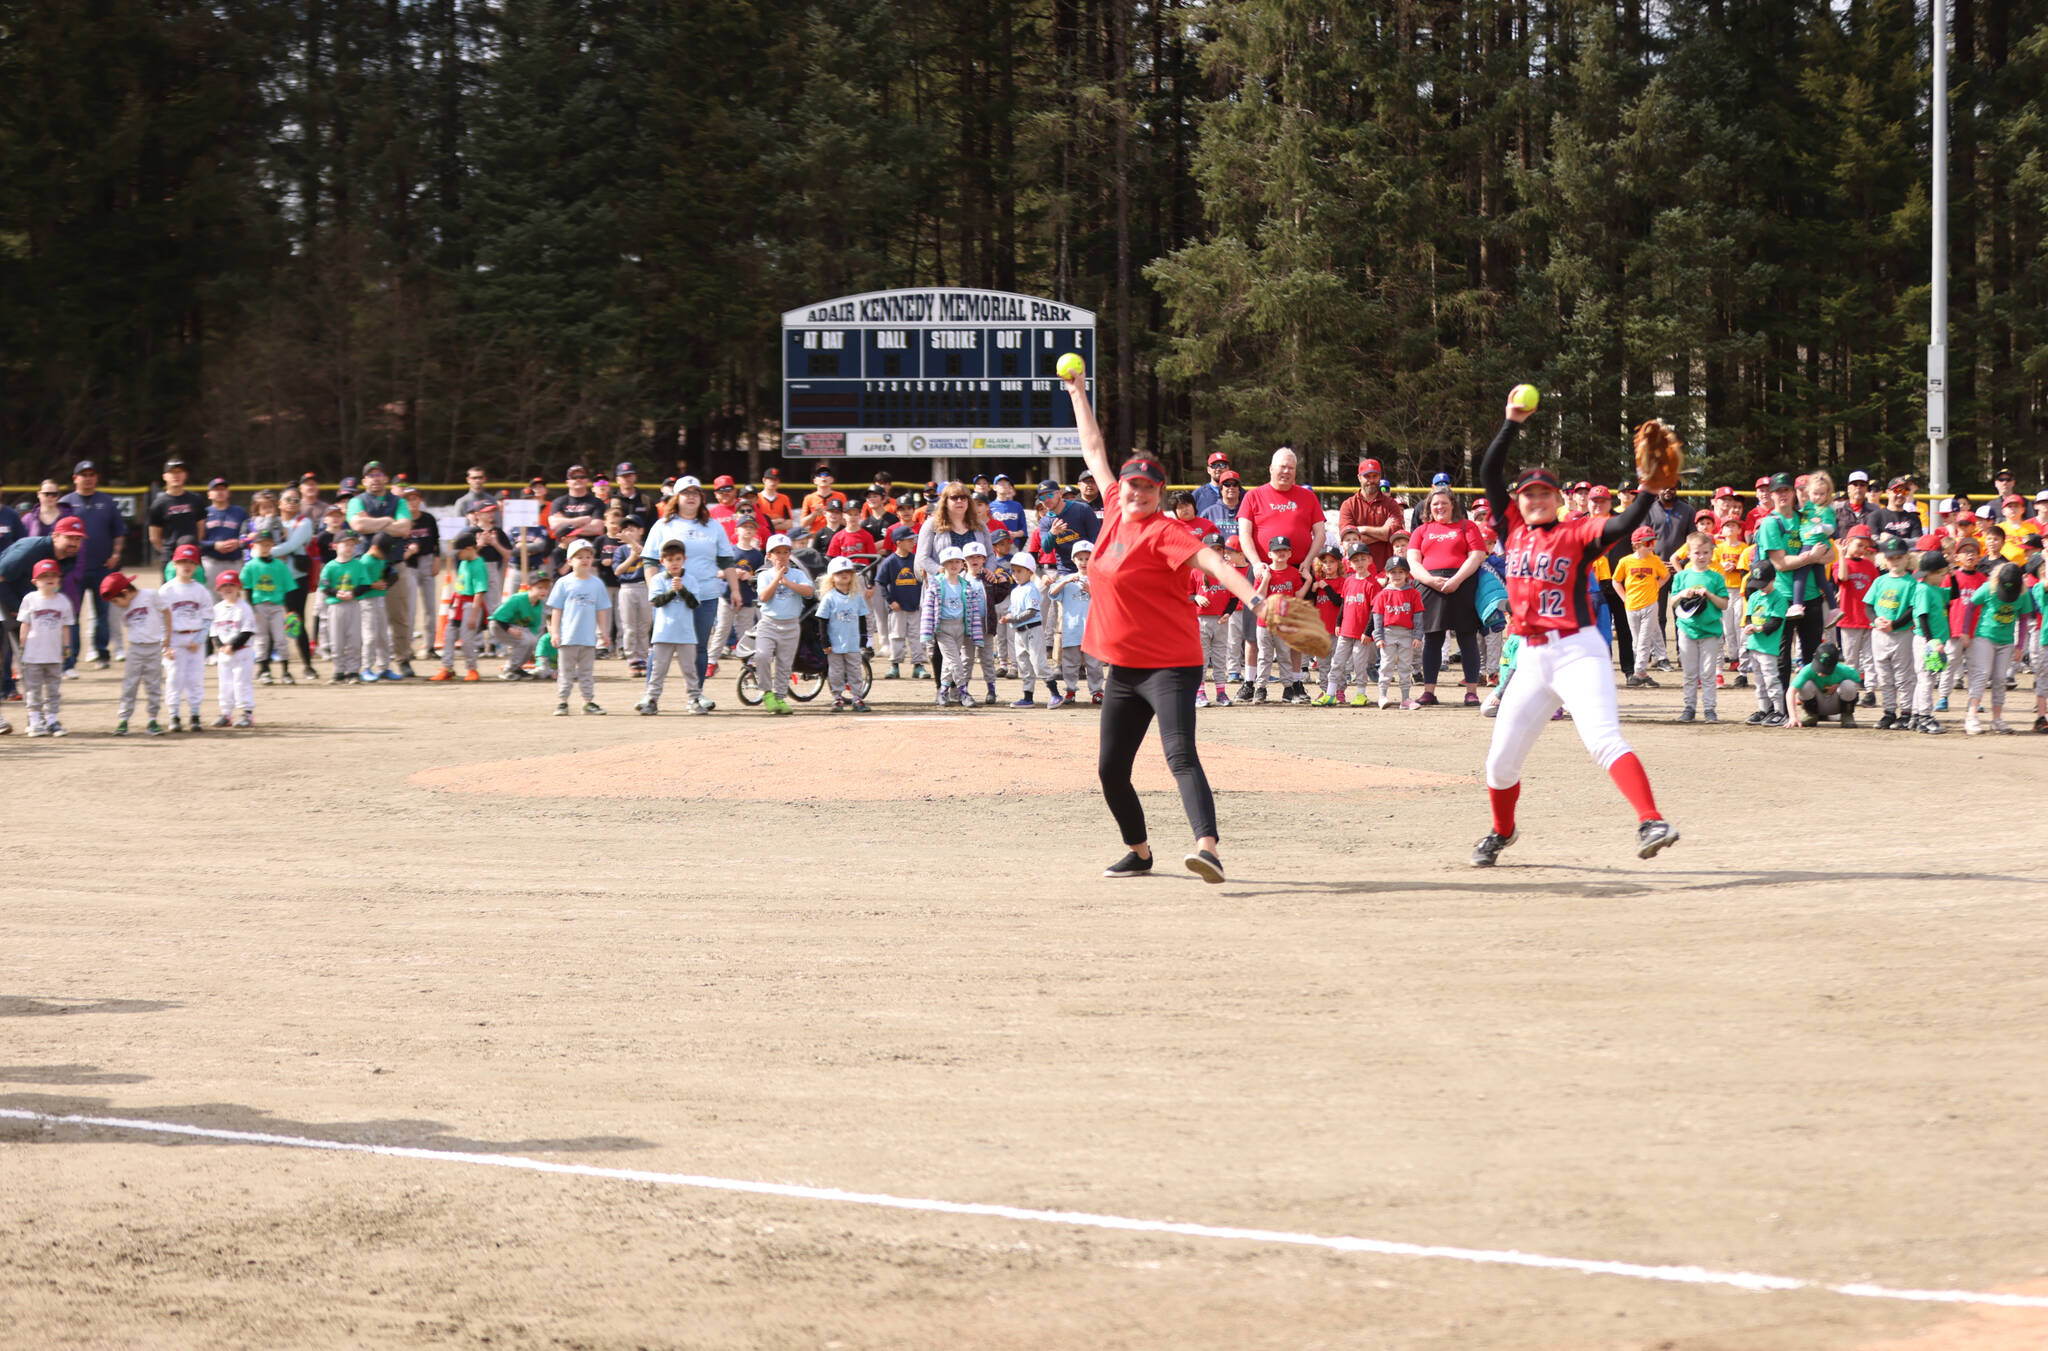 Mandy Massey and Gloria Bixby throw the first pitches of the Gastineau Channel Little League softball season on Saturday at Adair-Kennedy Memorial Park. The mother-daughter duo said some practice was needed ahead of the pitches, but the experience was “unforgettable” and fun. (Ben Hohenstatt / Juneau Empire)